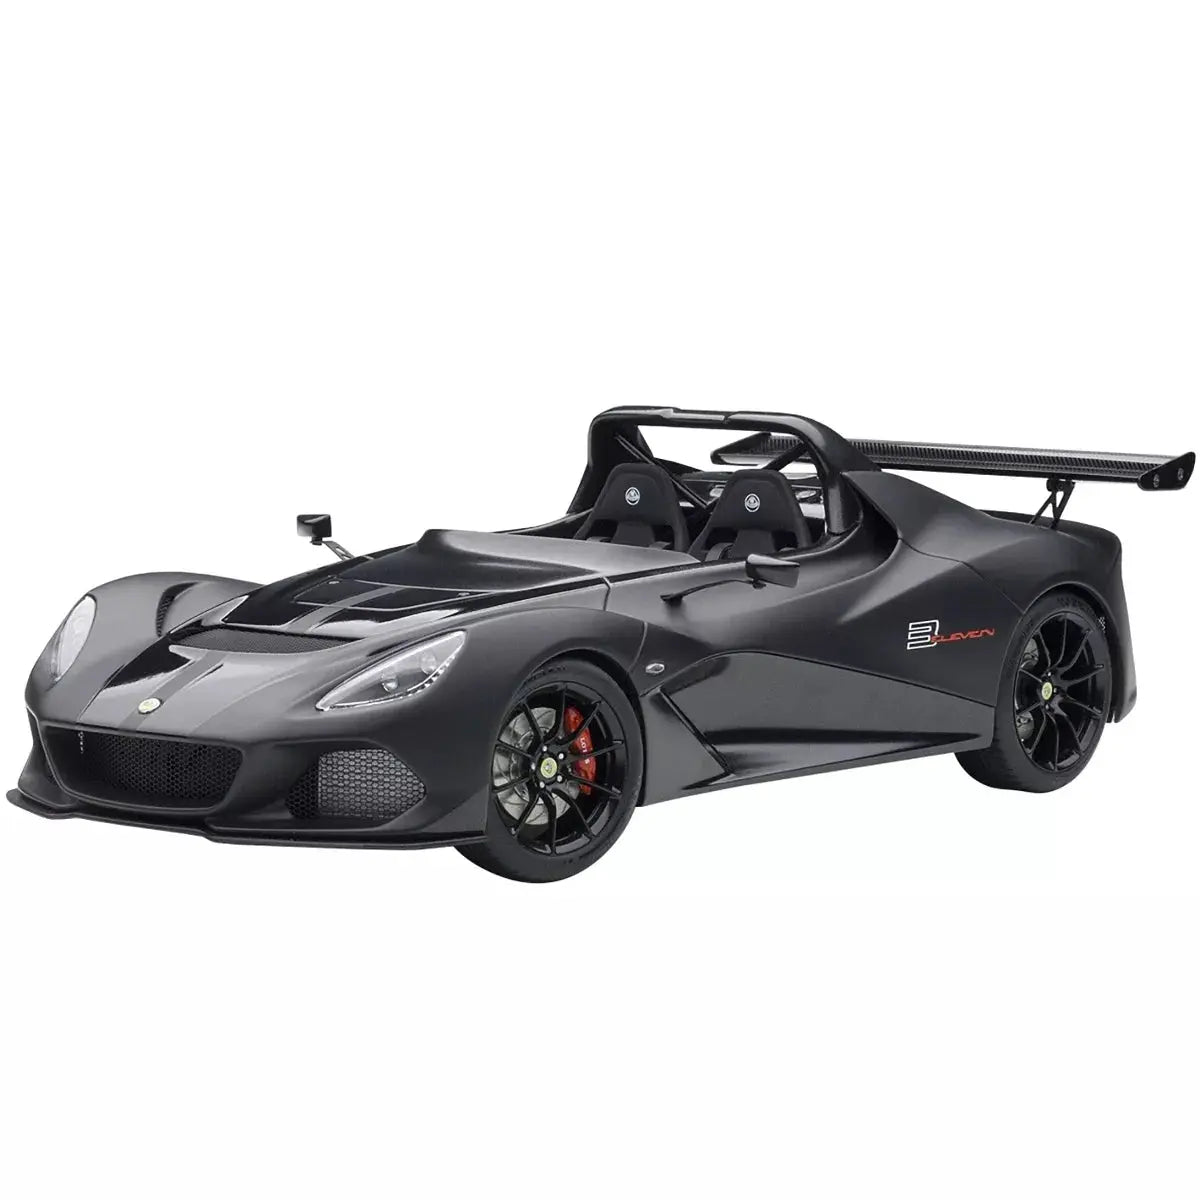 Lotus 3-Eleven Matt Black with Gloss Black Accents 1/18 Scale - Perfect Diecast